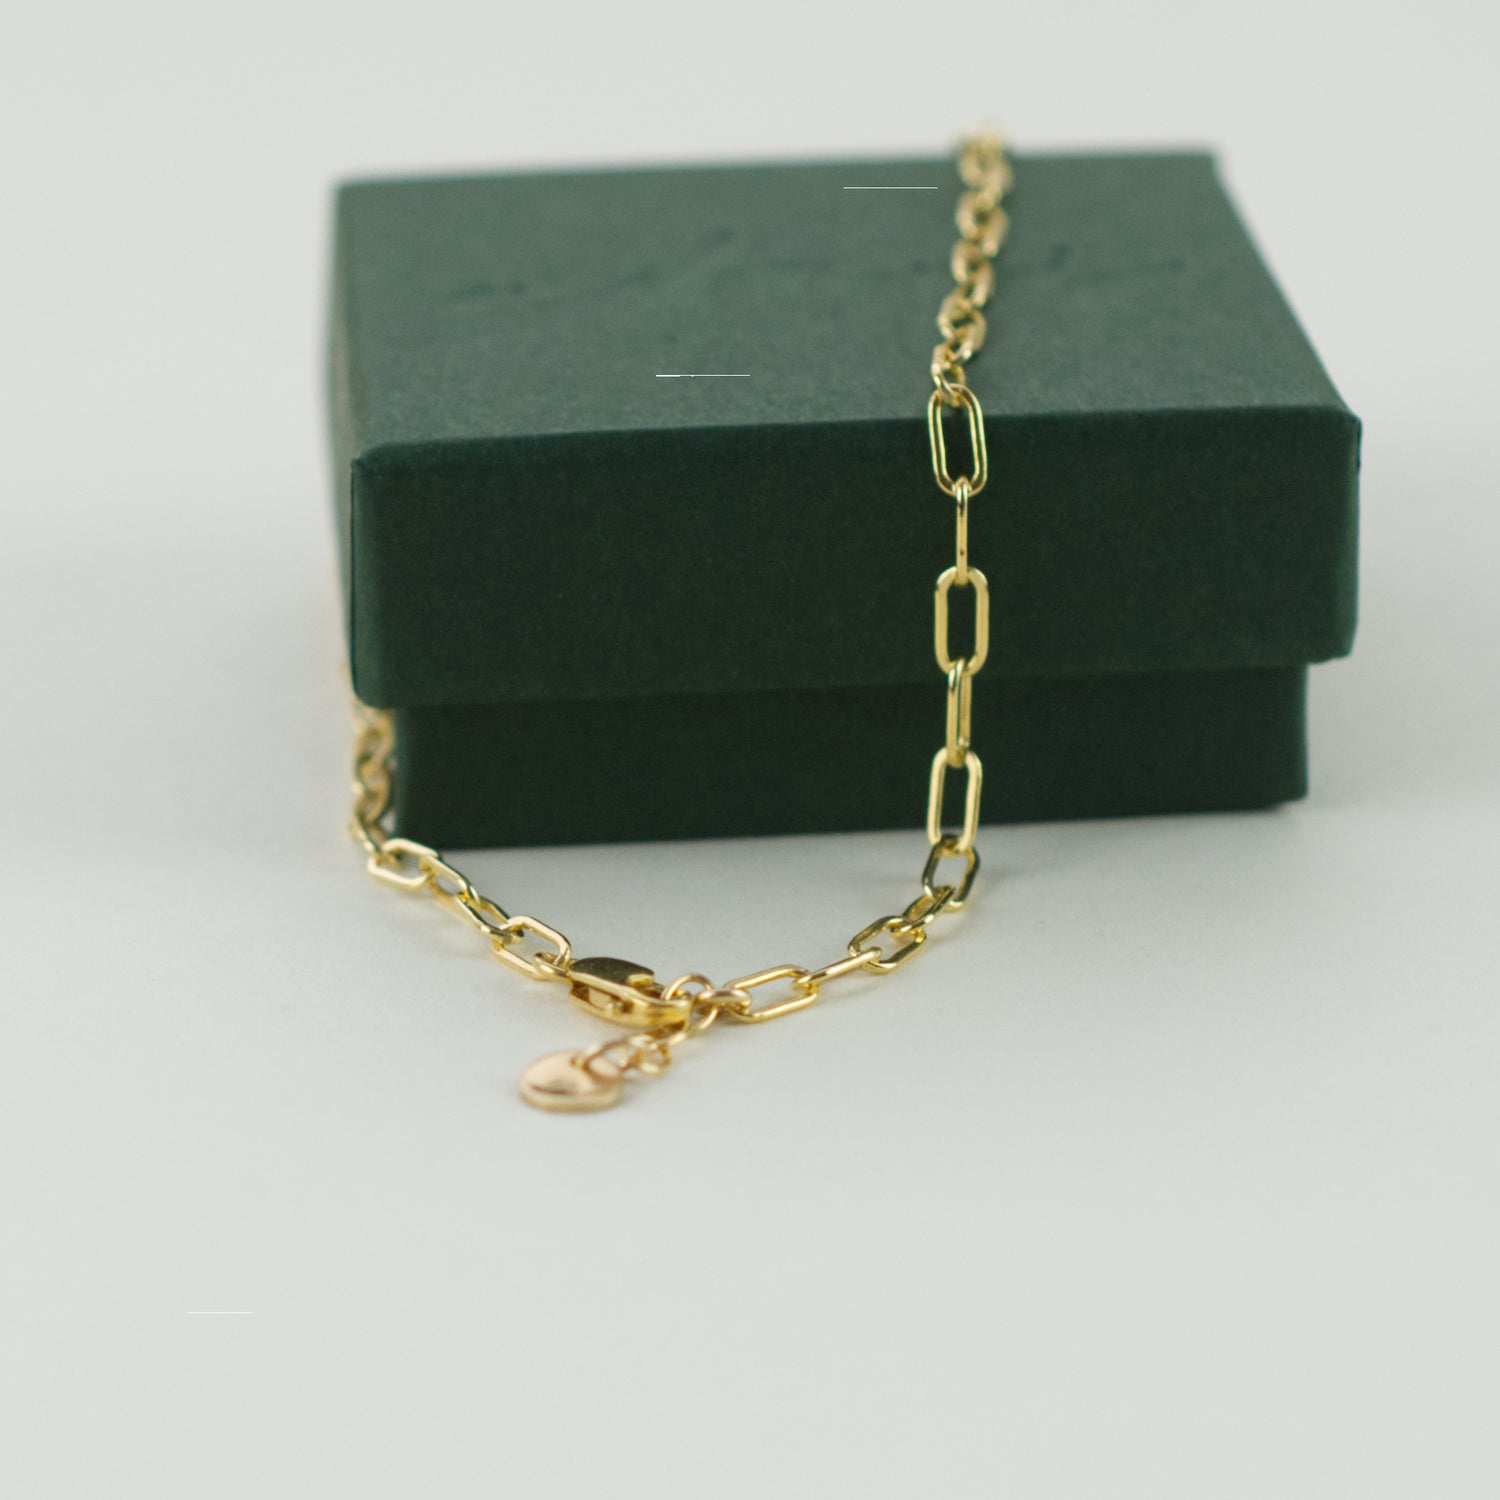 14K Gold Fill Paperclip Chain Anklet with a lobster clasp and a 3 ring adjustable closure